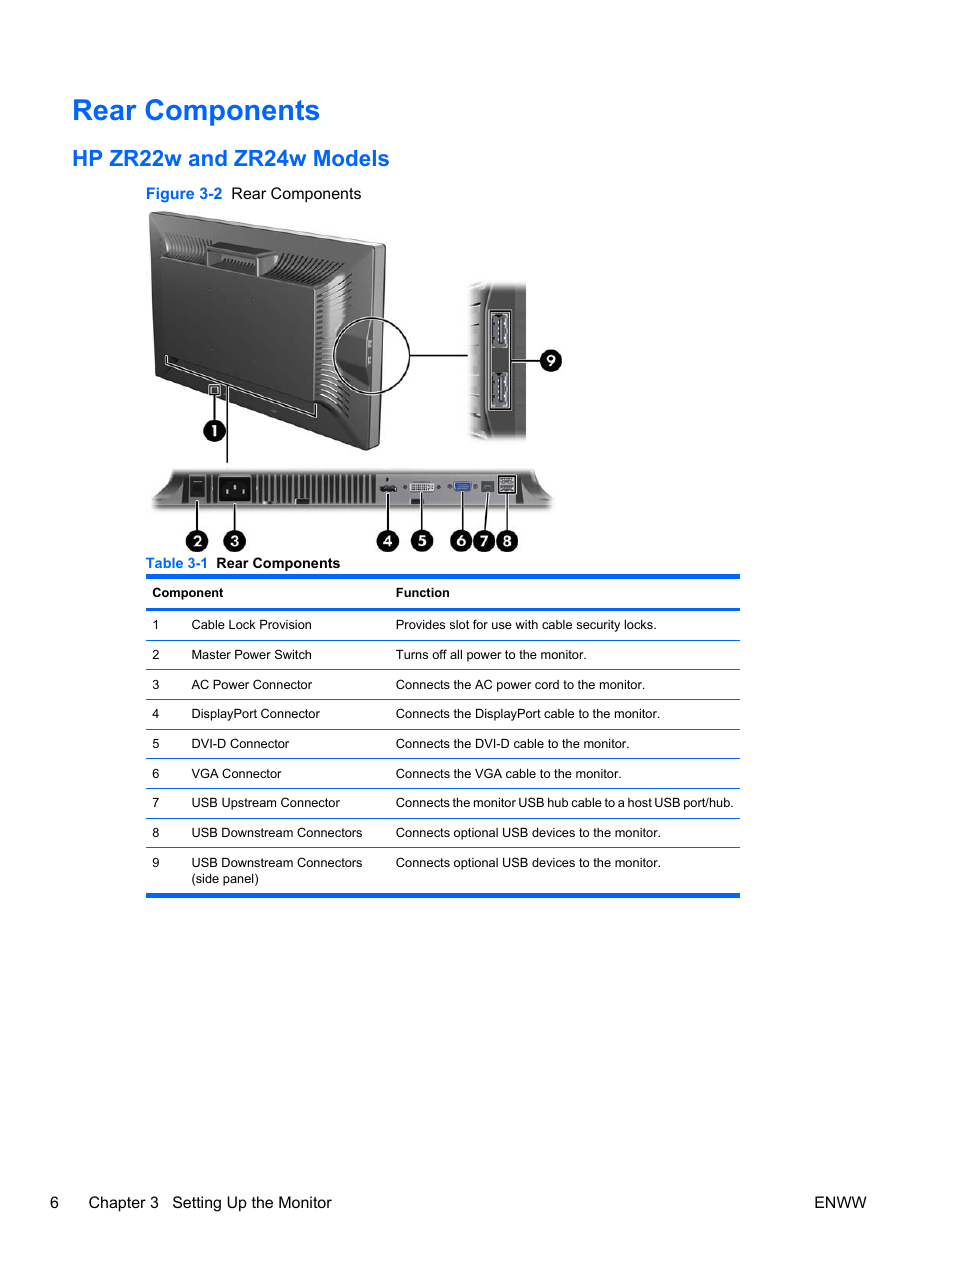 Rear components, Hp zr22w and zr24w models | HP ZR24w 24-inch S-IPS LCD  Monitor User Manual | Page 14 / 53